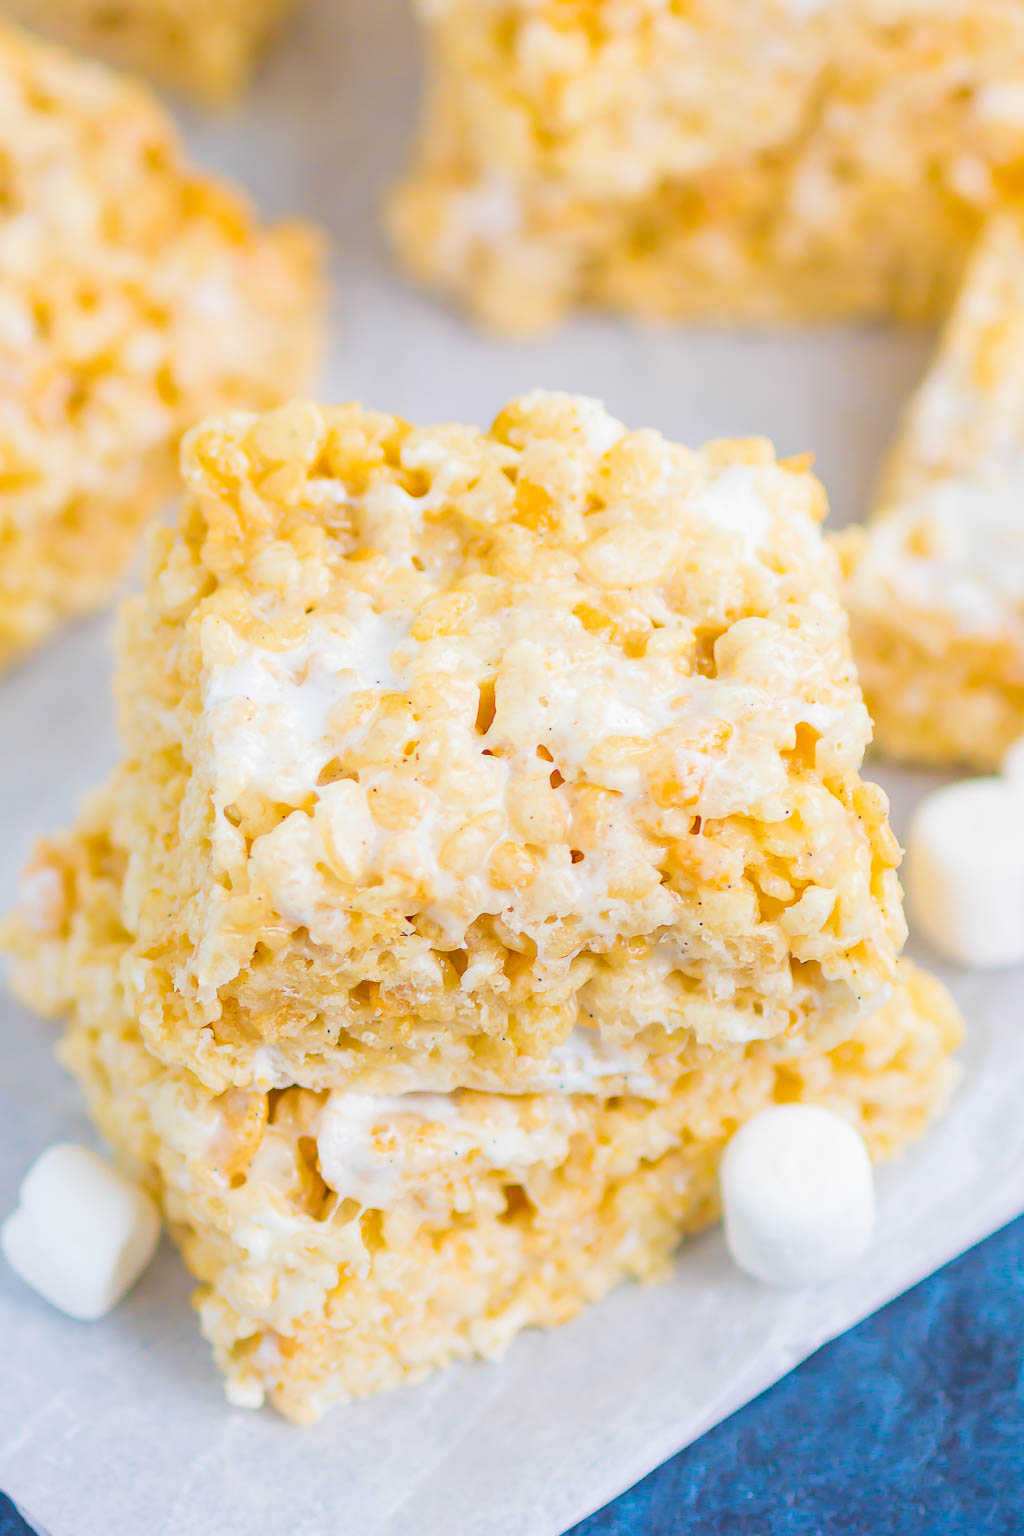 Rice Krispie Treats are soft, chewy, and loaded with pockets of sweet marshmallows. Made with just a few ingredients and ready in no time, this classic dessert will be a hit with everyone! #ricekrispietreats #bestricekrispietreats #ricekrispies #ricekrispie #marshmallowdessert #marshmallows #nobake